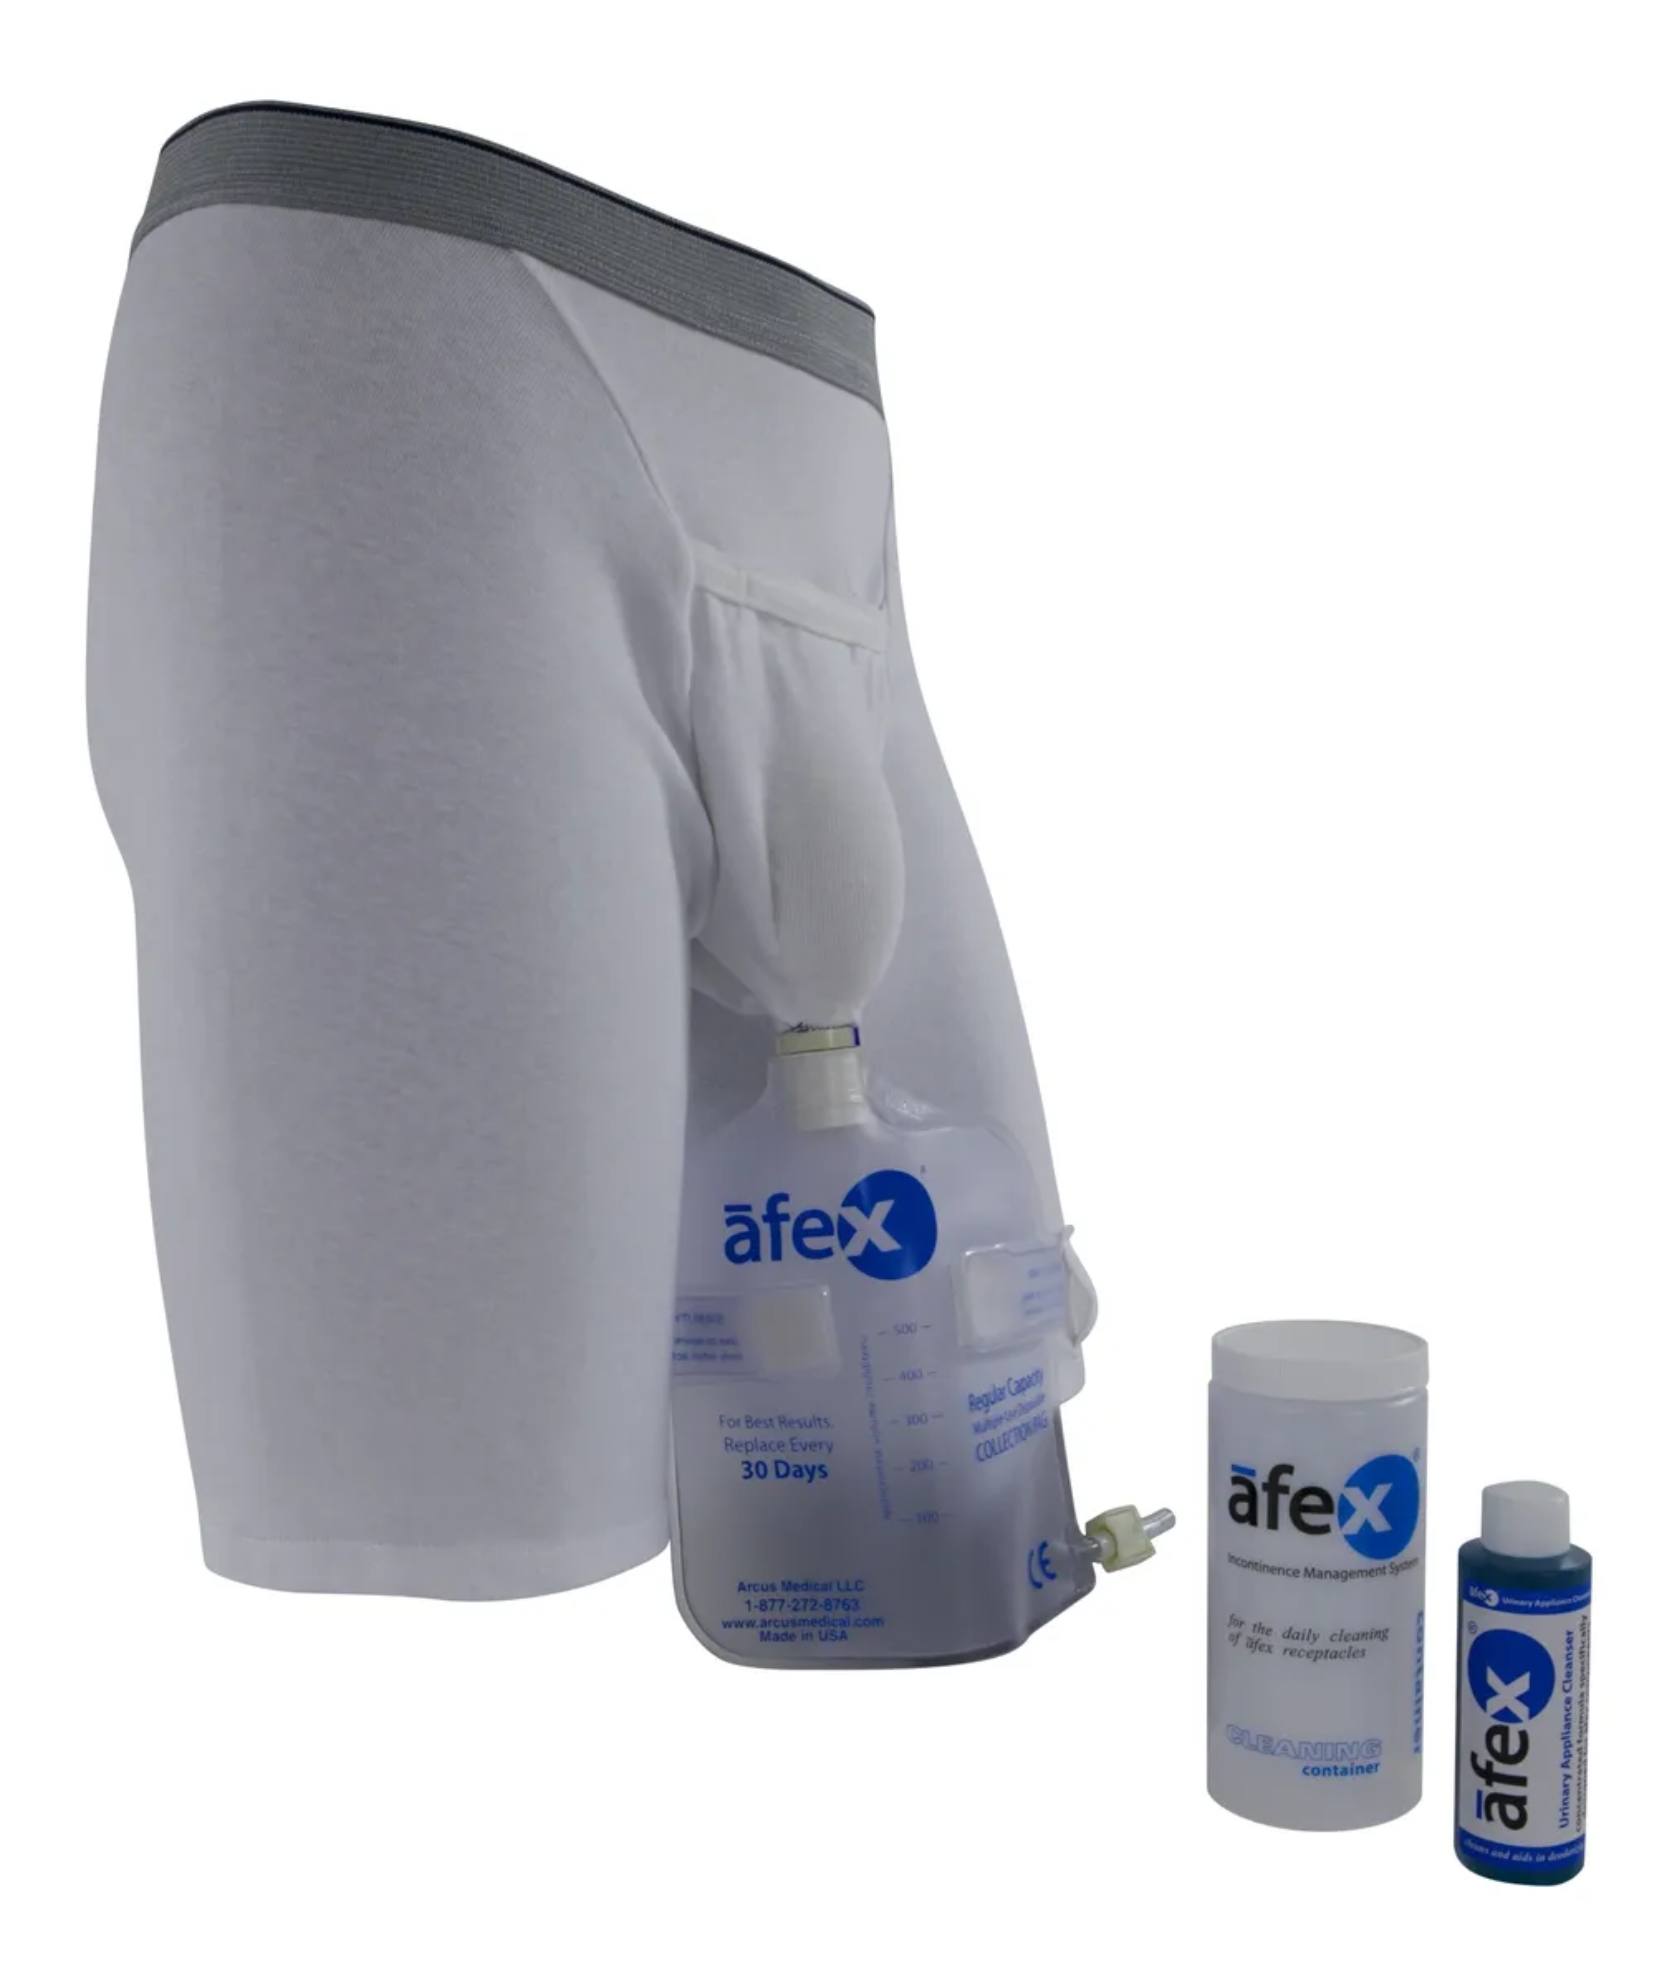 Afex Incontinence Management System Starter Kit - High Style